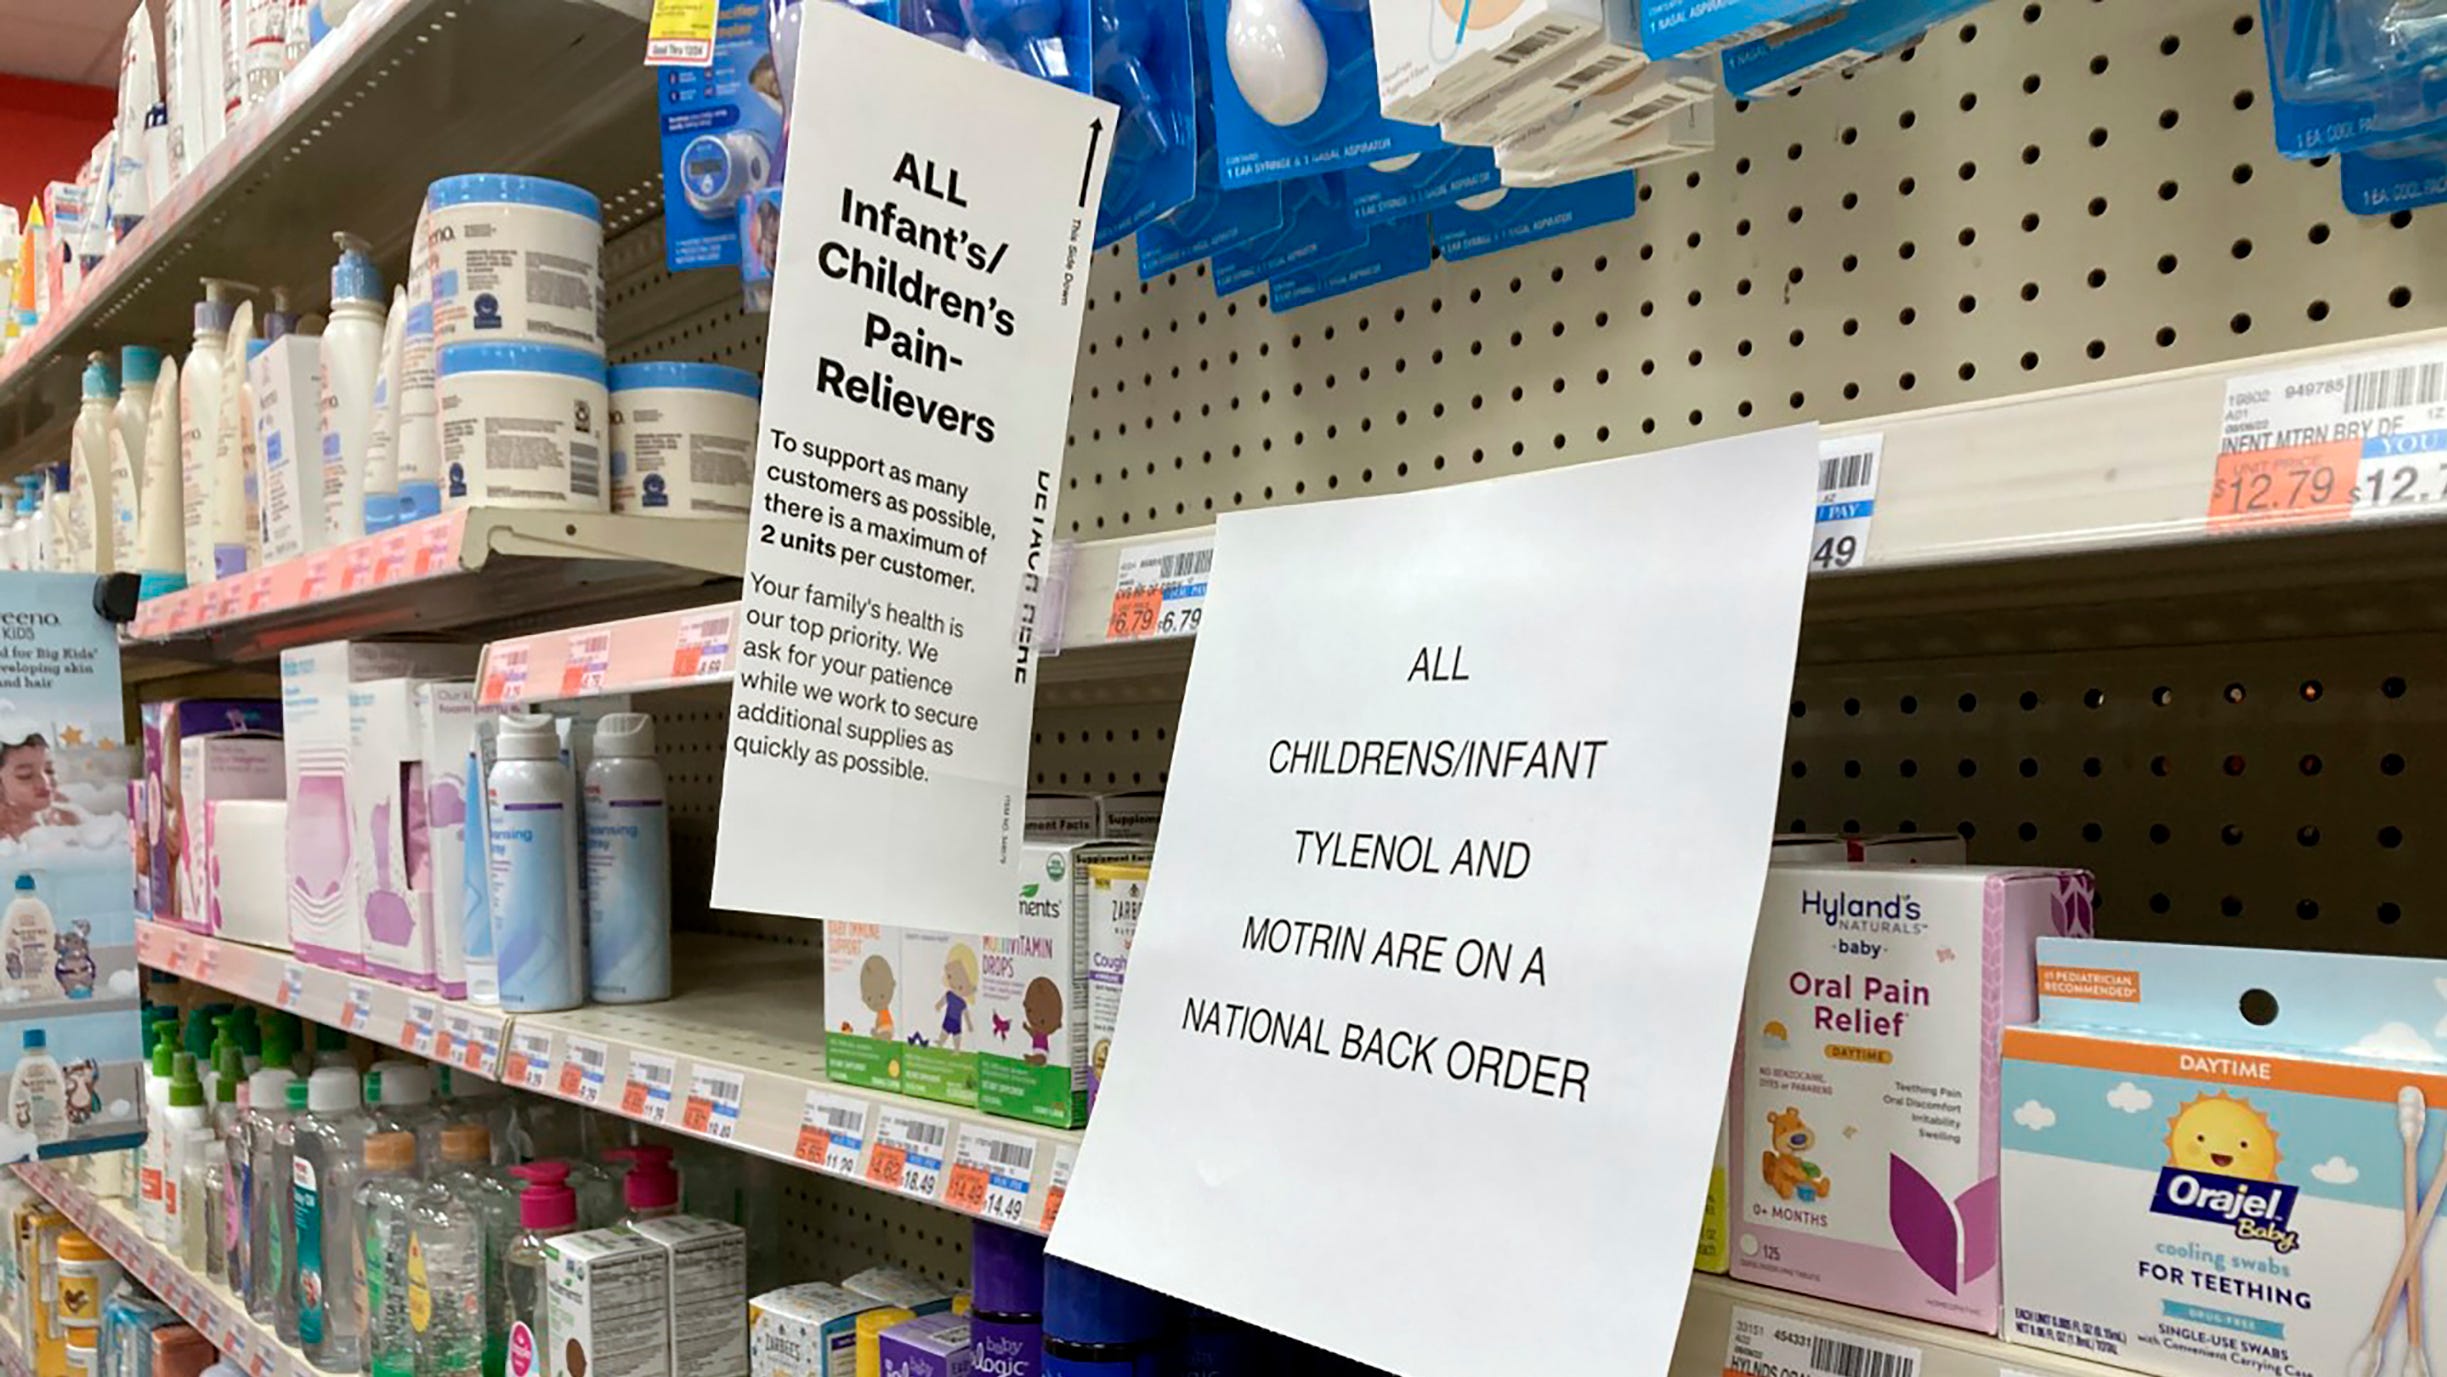 CVS, Walgreens limit sales of some children's pain relief medication. Here's what parents should know.